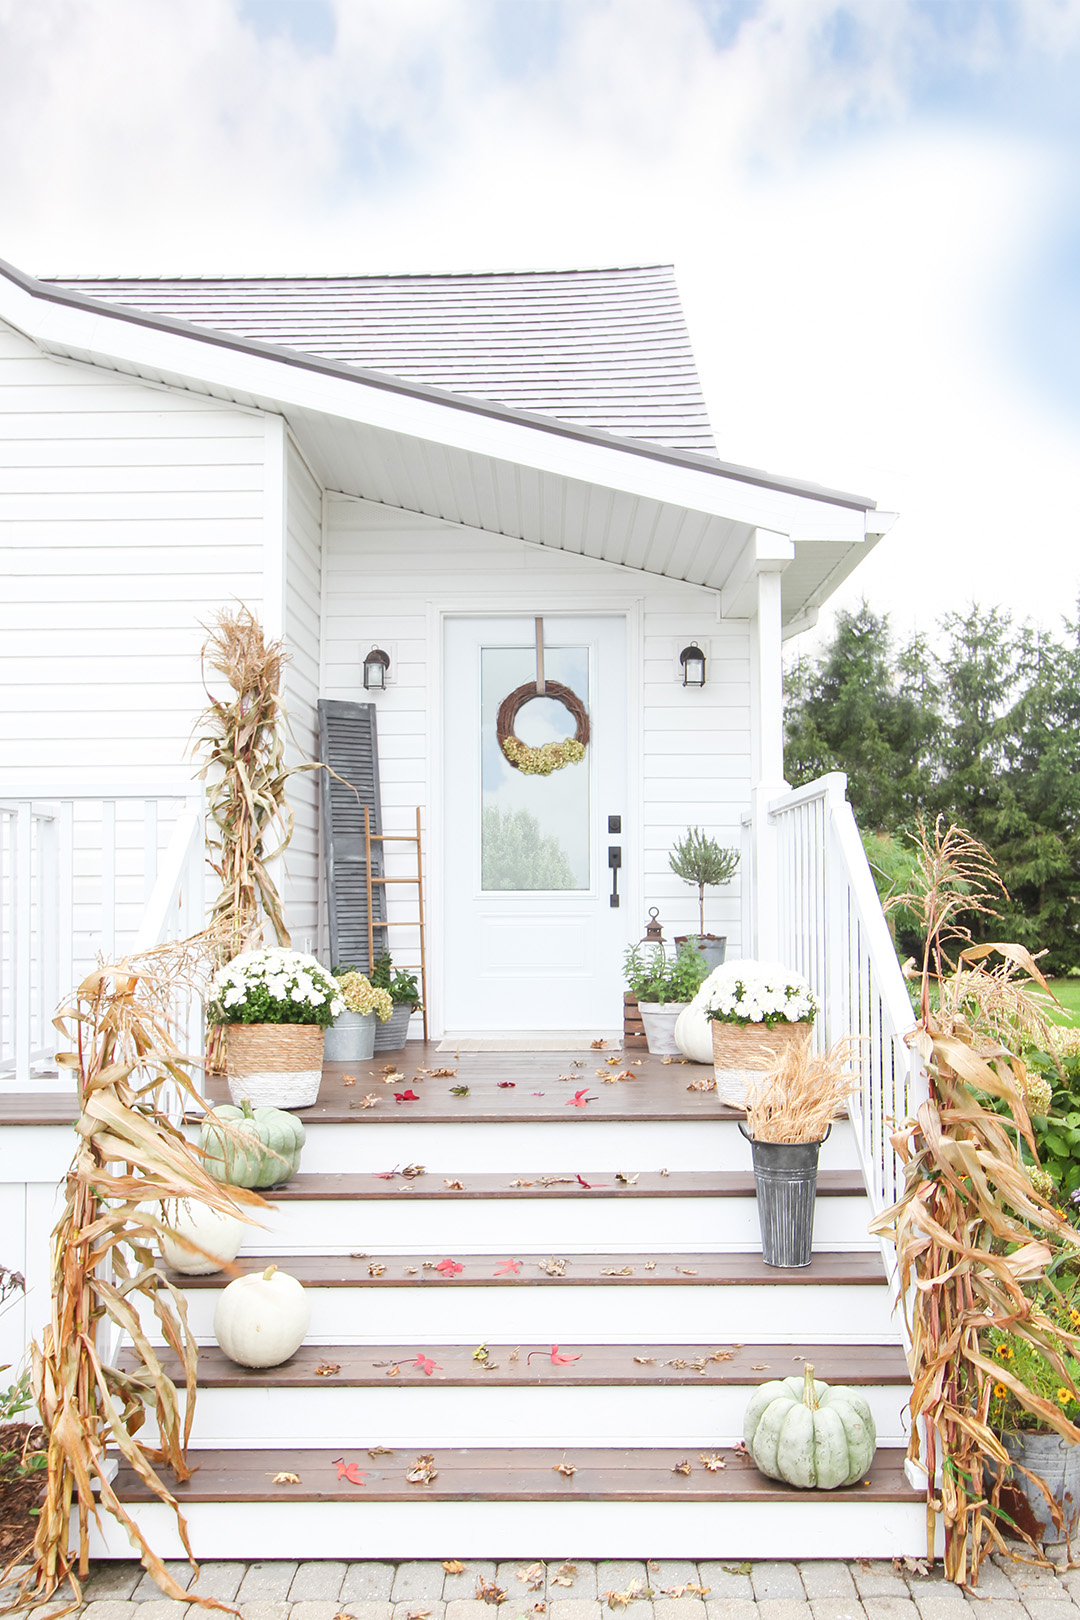 In today's post I'll be sharing my neutral farmhouse fall porch decor for this year that I've put together on the side porch!